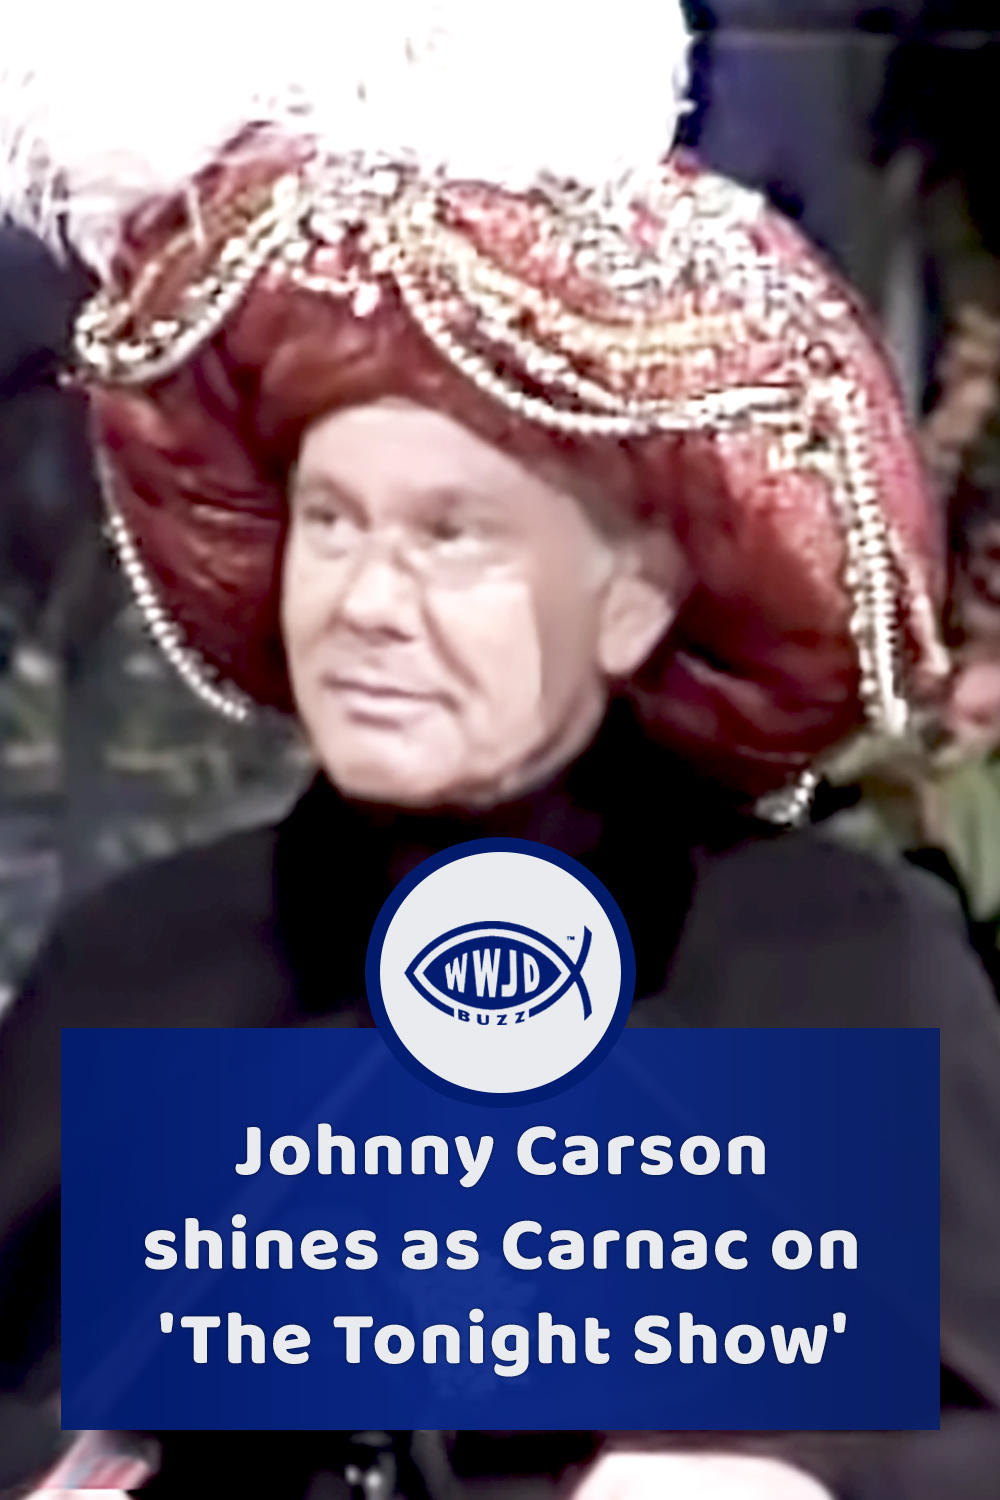 Johnny Carson shines as Carnac on \'The Tonight Show\'